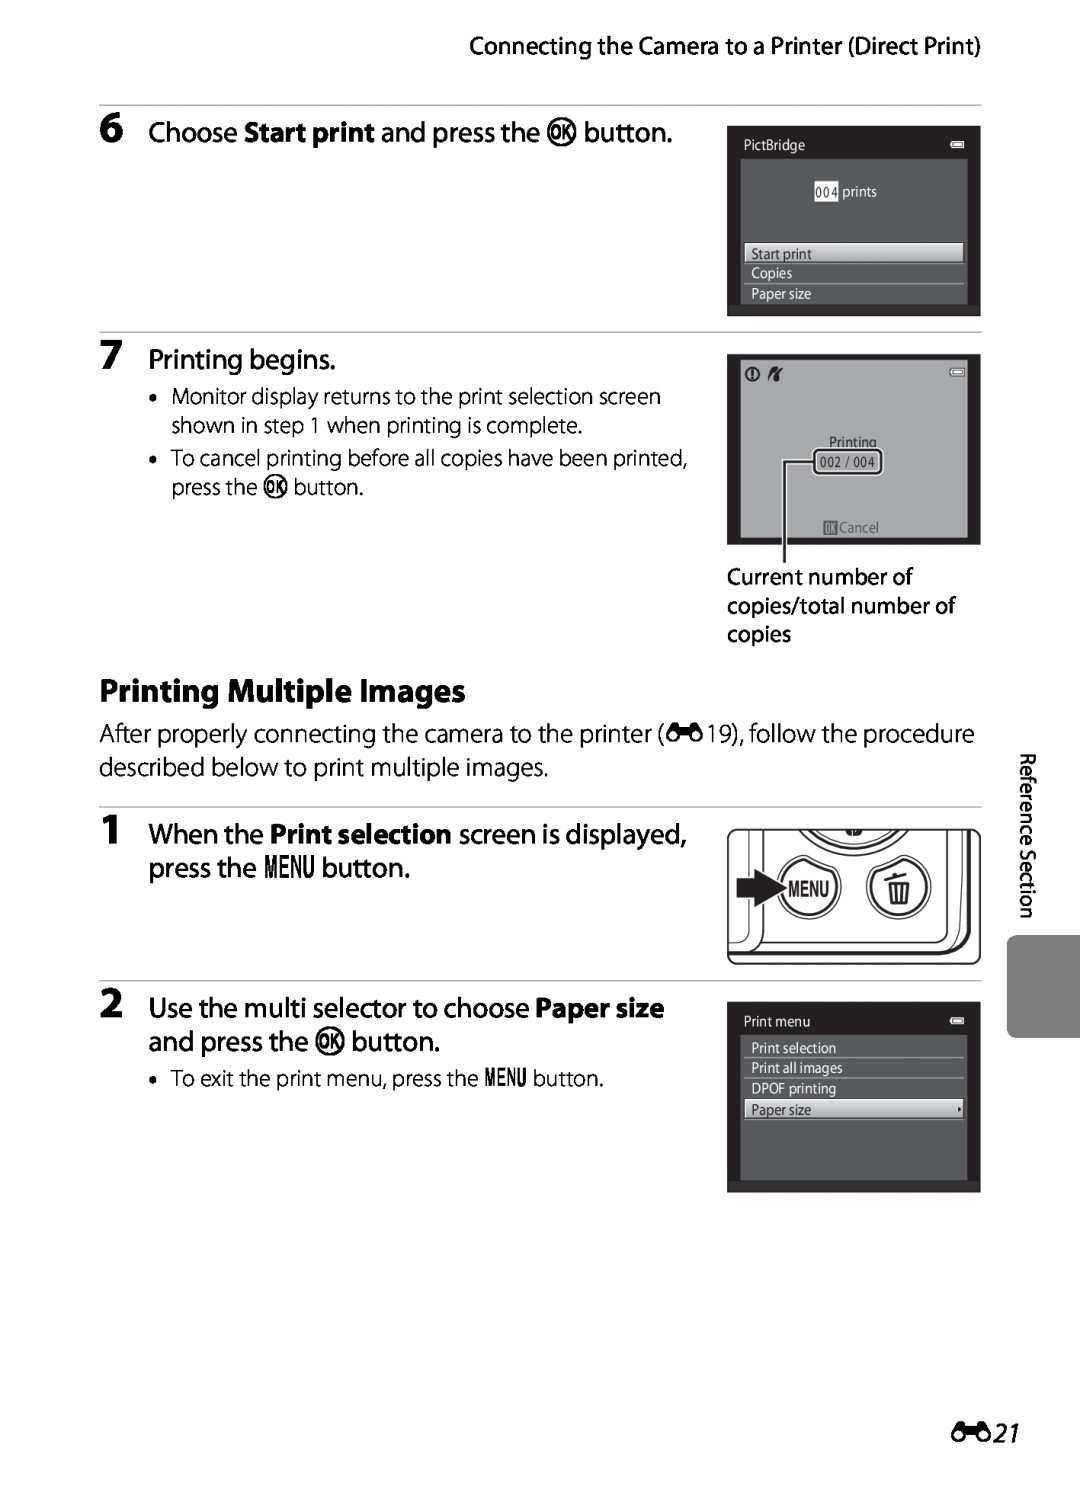 Nikon S2600 Printing Multiple Images, Choose Start print and press the k button, Printing begins, and press the kbutton 